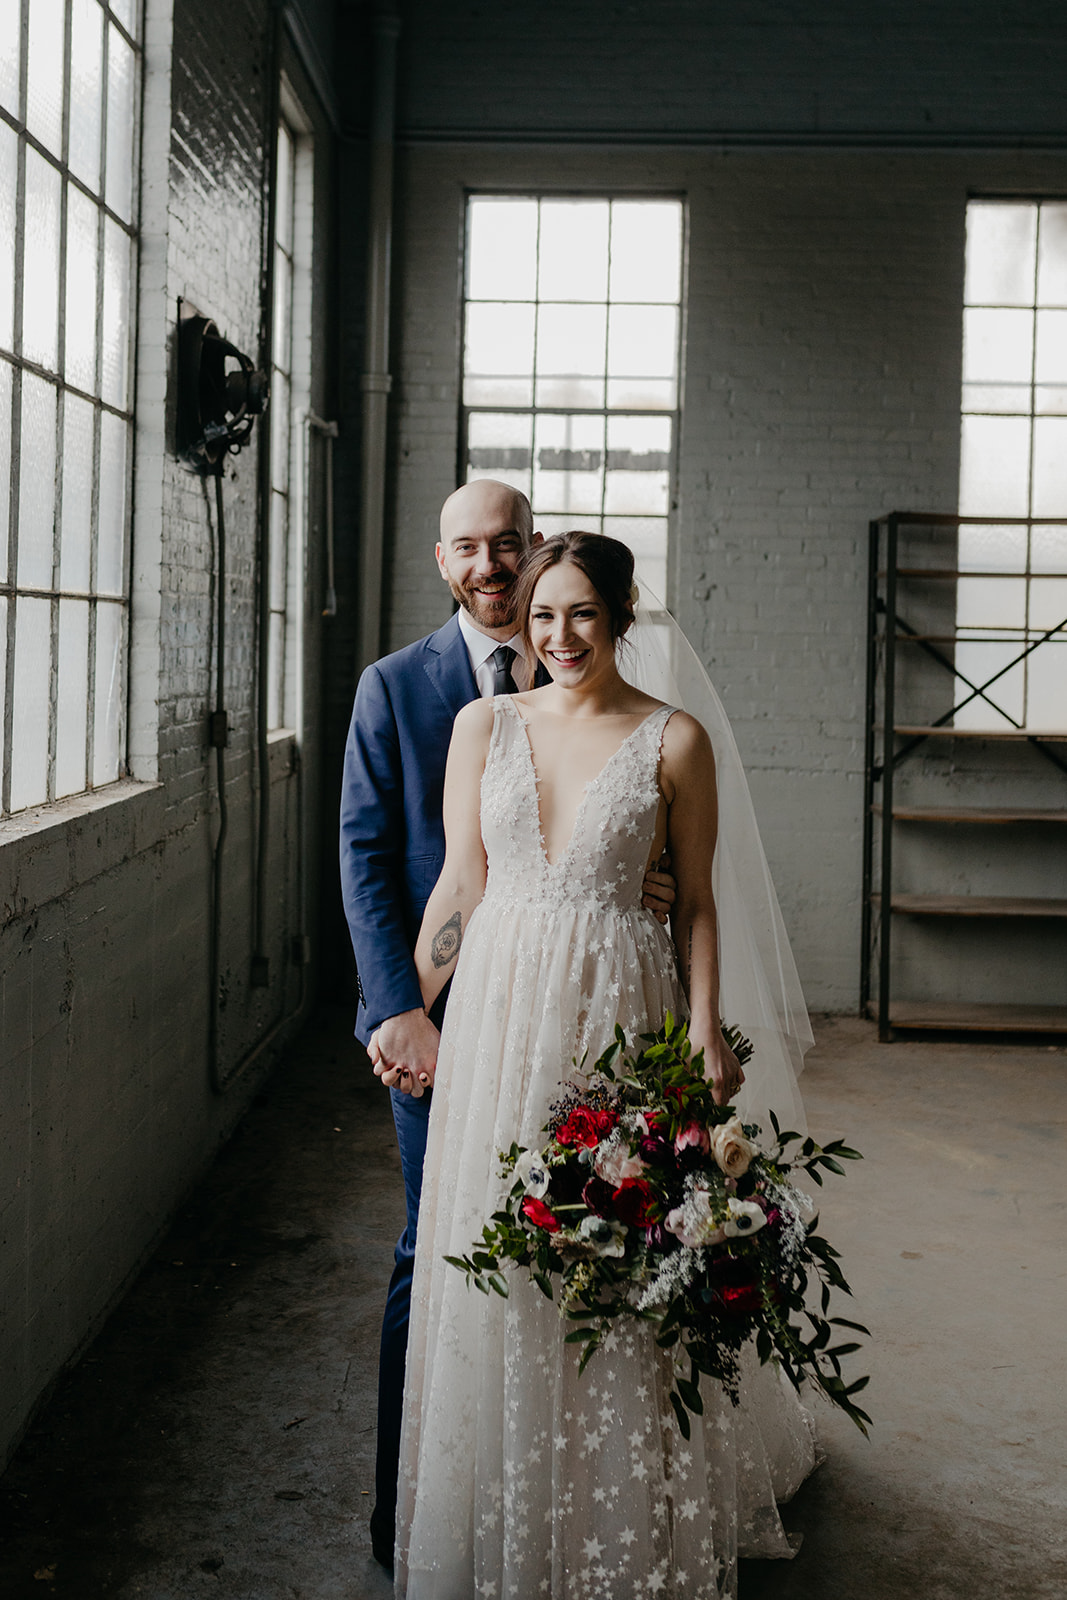 Starry night inspired wedding! Jewel tone bride's bouquet and star covered wedding dress.